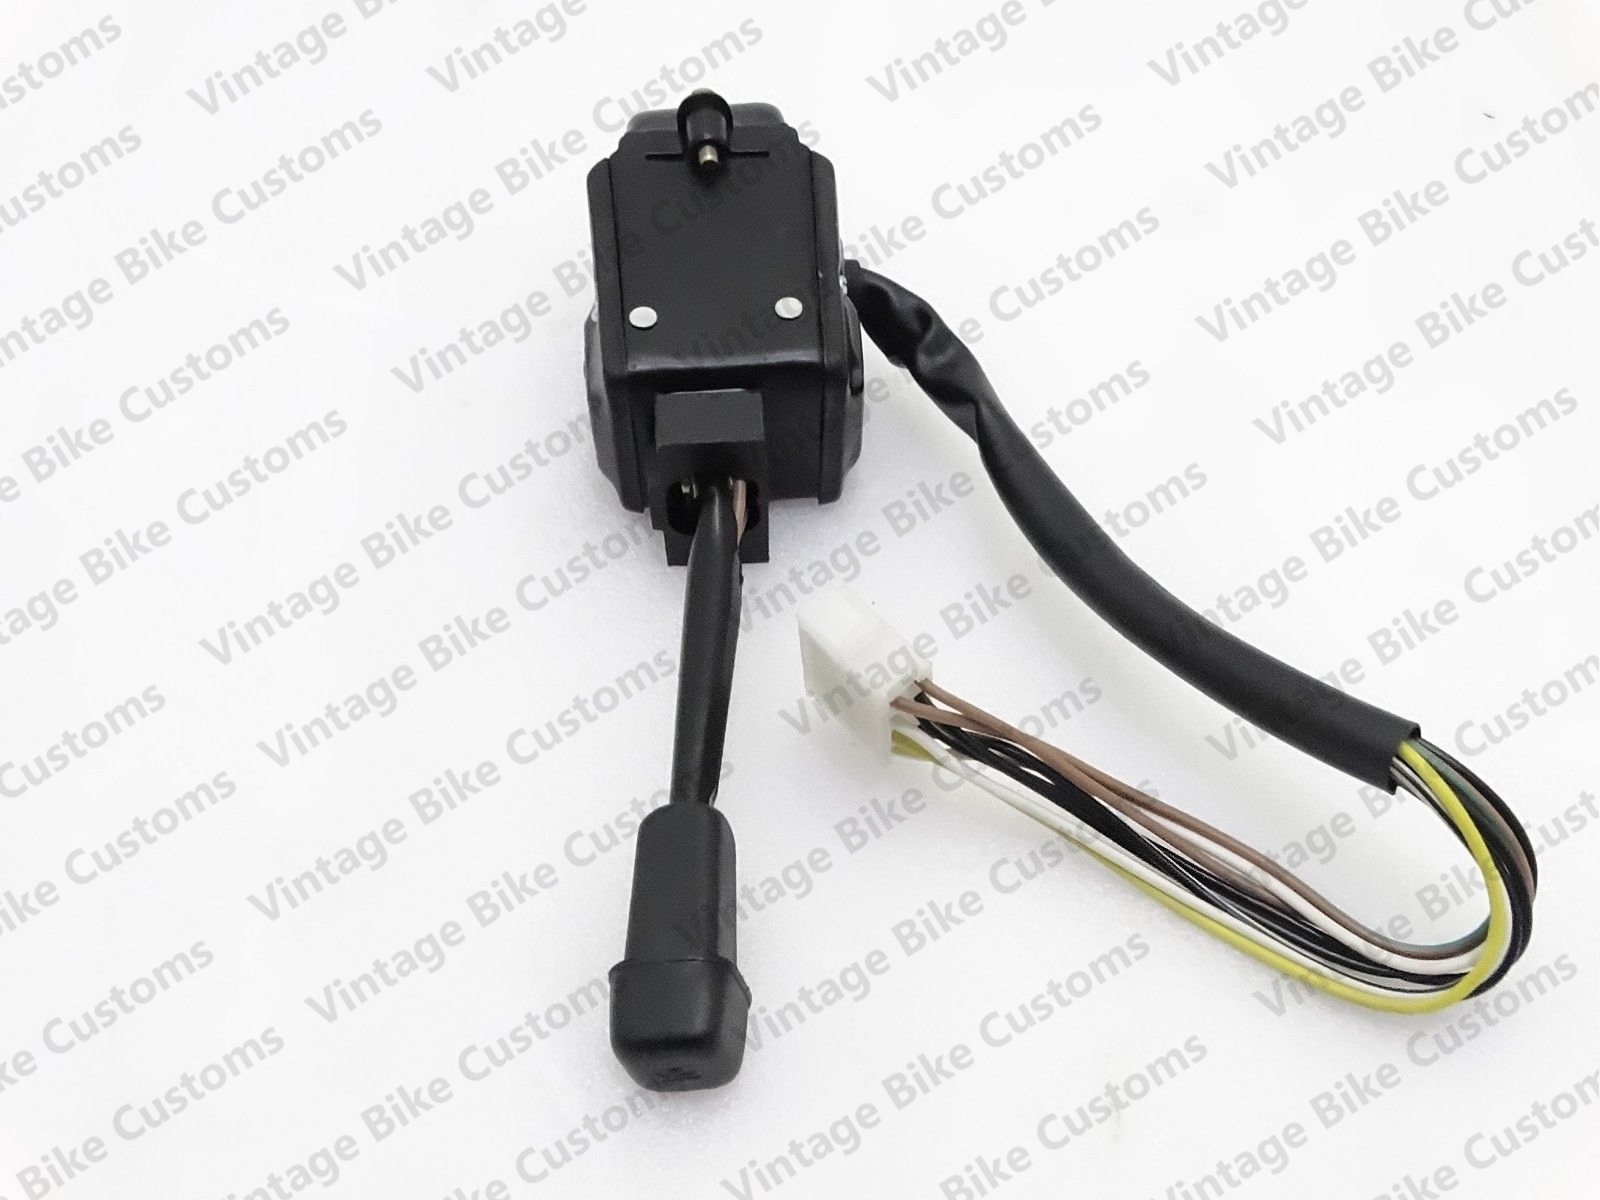 Horn Indicator Combination Switch For Jeep Ford Willys Mb Cj Gpw